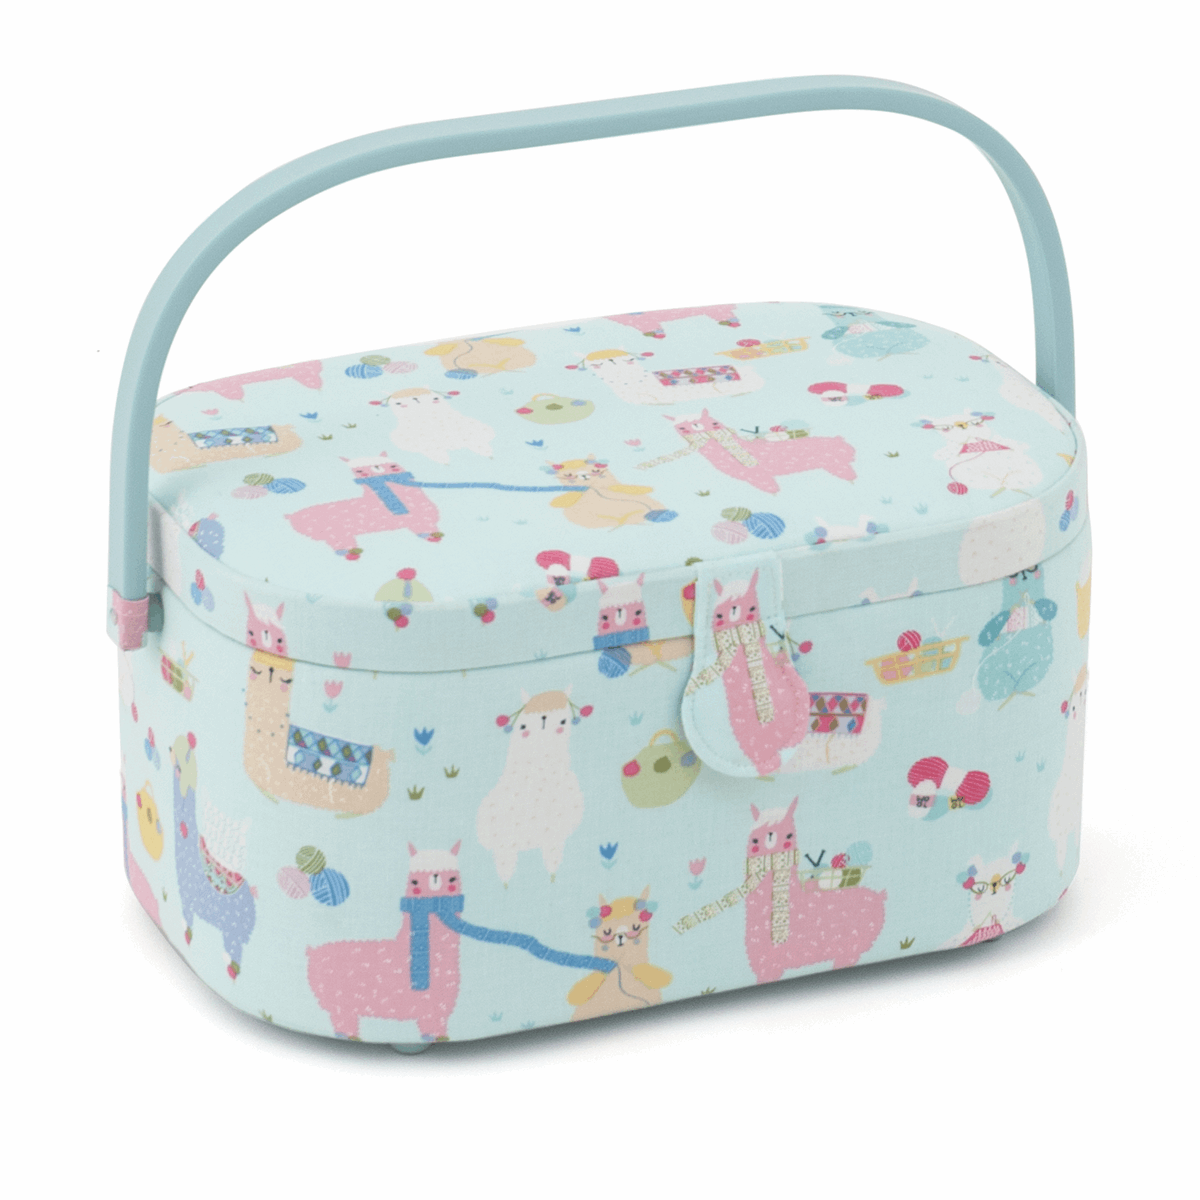 Alpacas Sewing Box - Large Oval